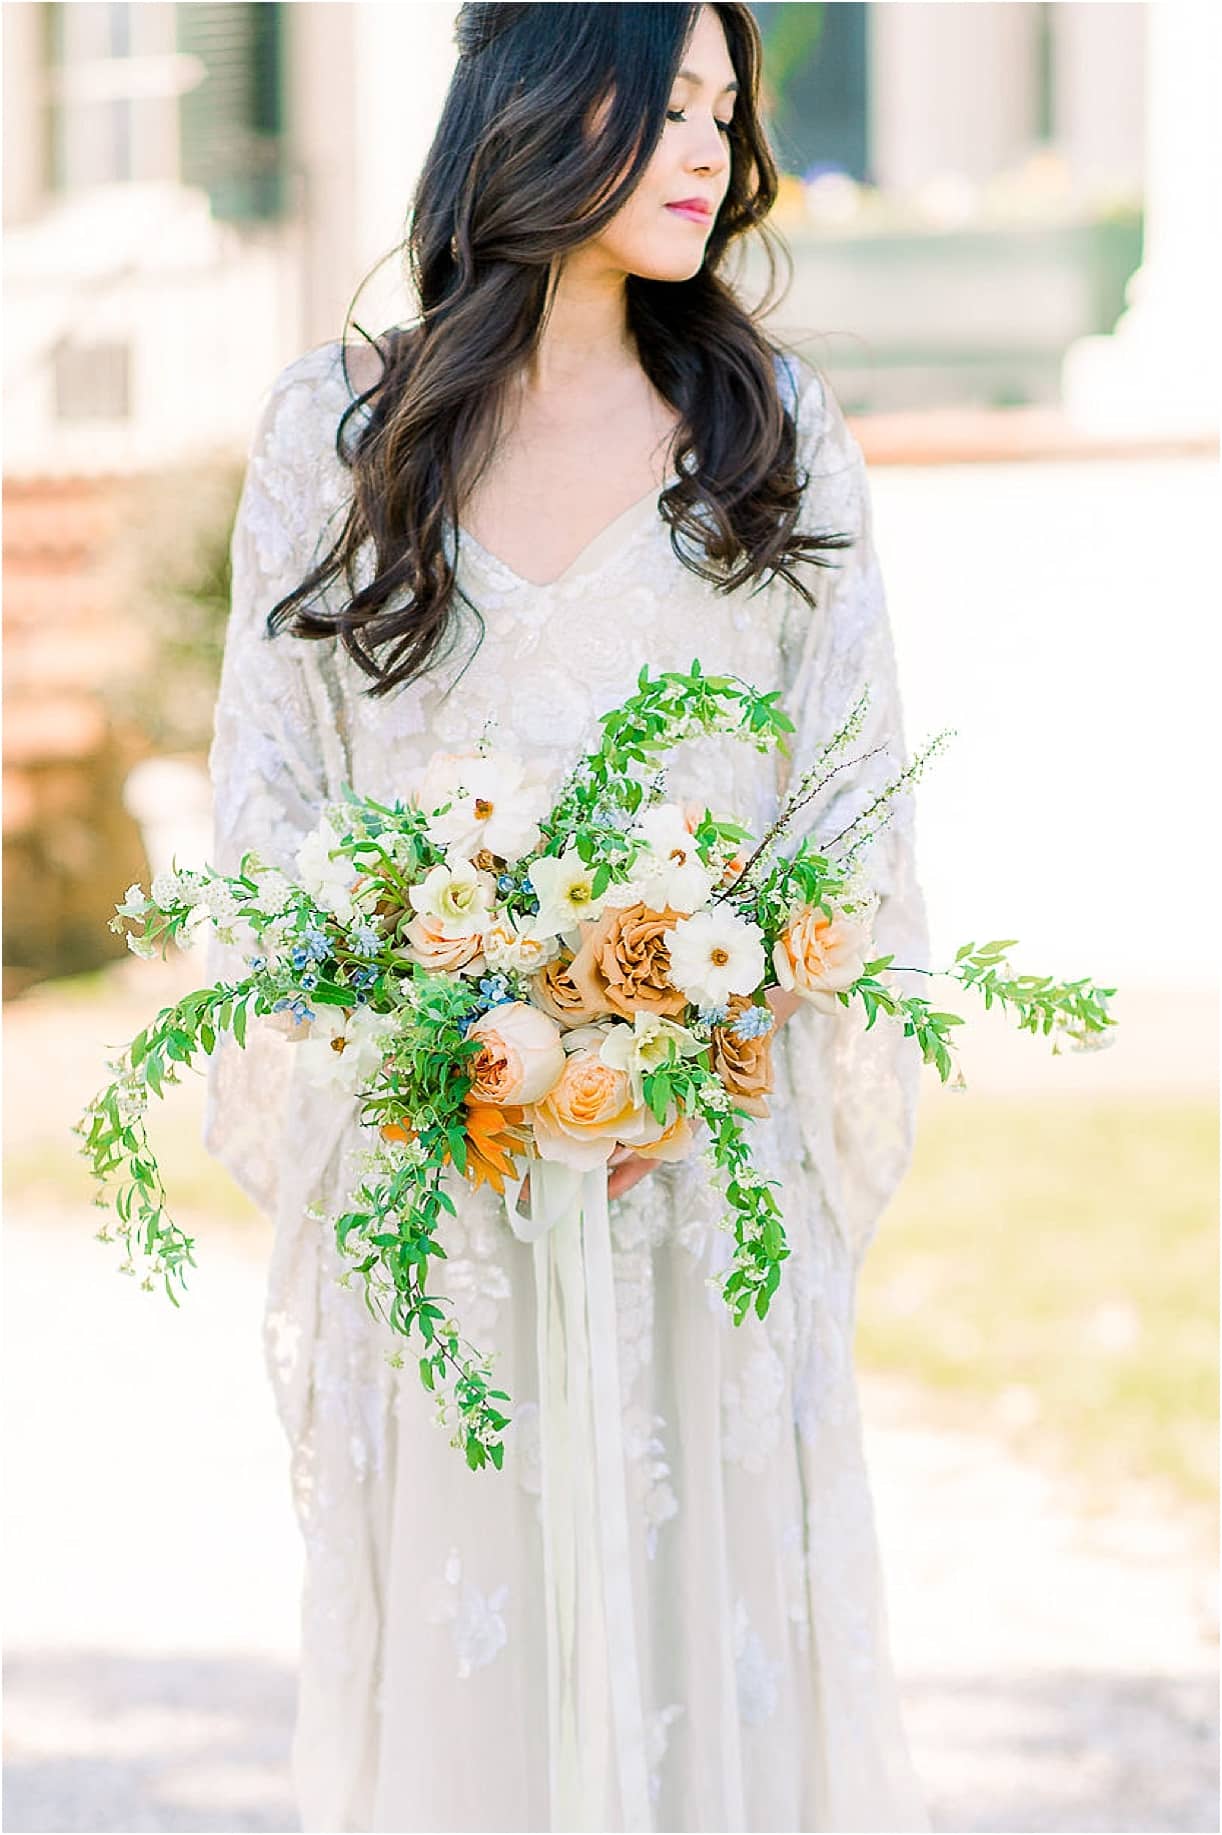 Autumnal Styled Shoot with Unique Spring Wedding Colors | Hill City Bride Virginia Wedding Blog Bridal Bouquet